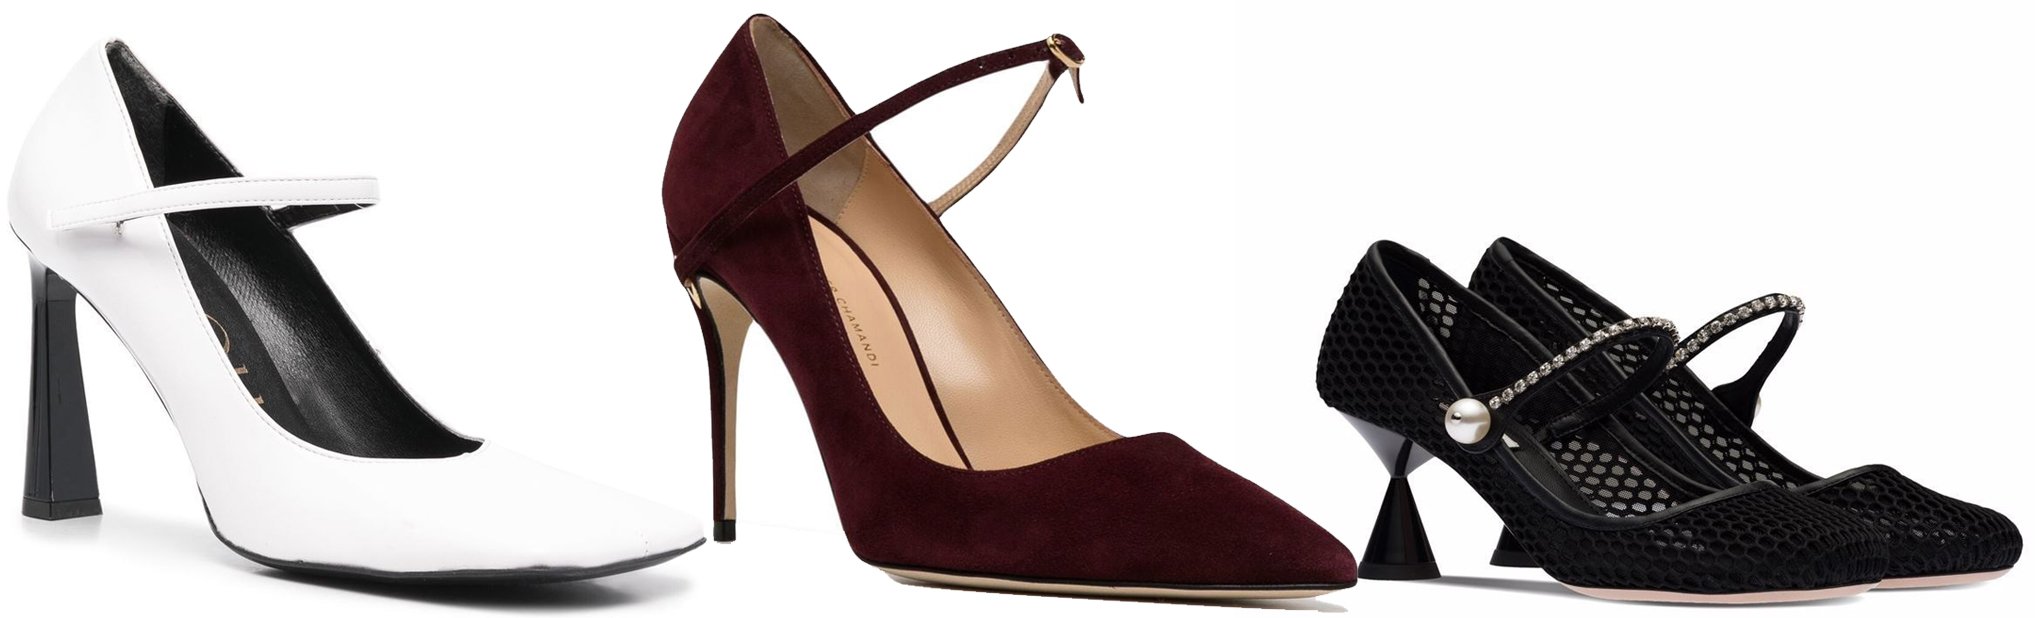 Mary Jane pumps are defined by the strap across the instep